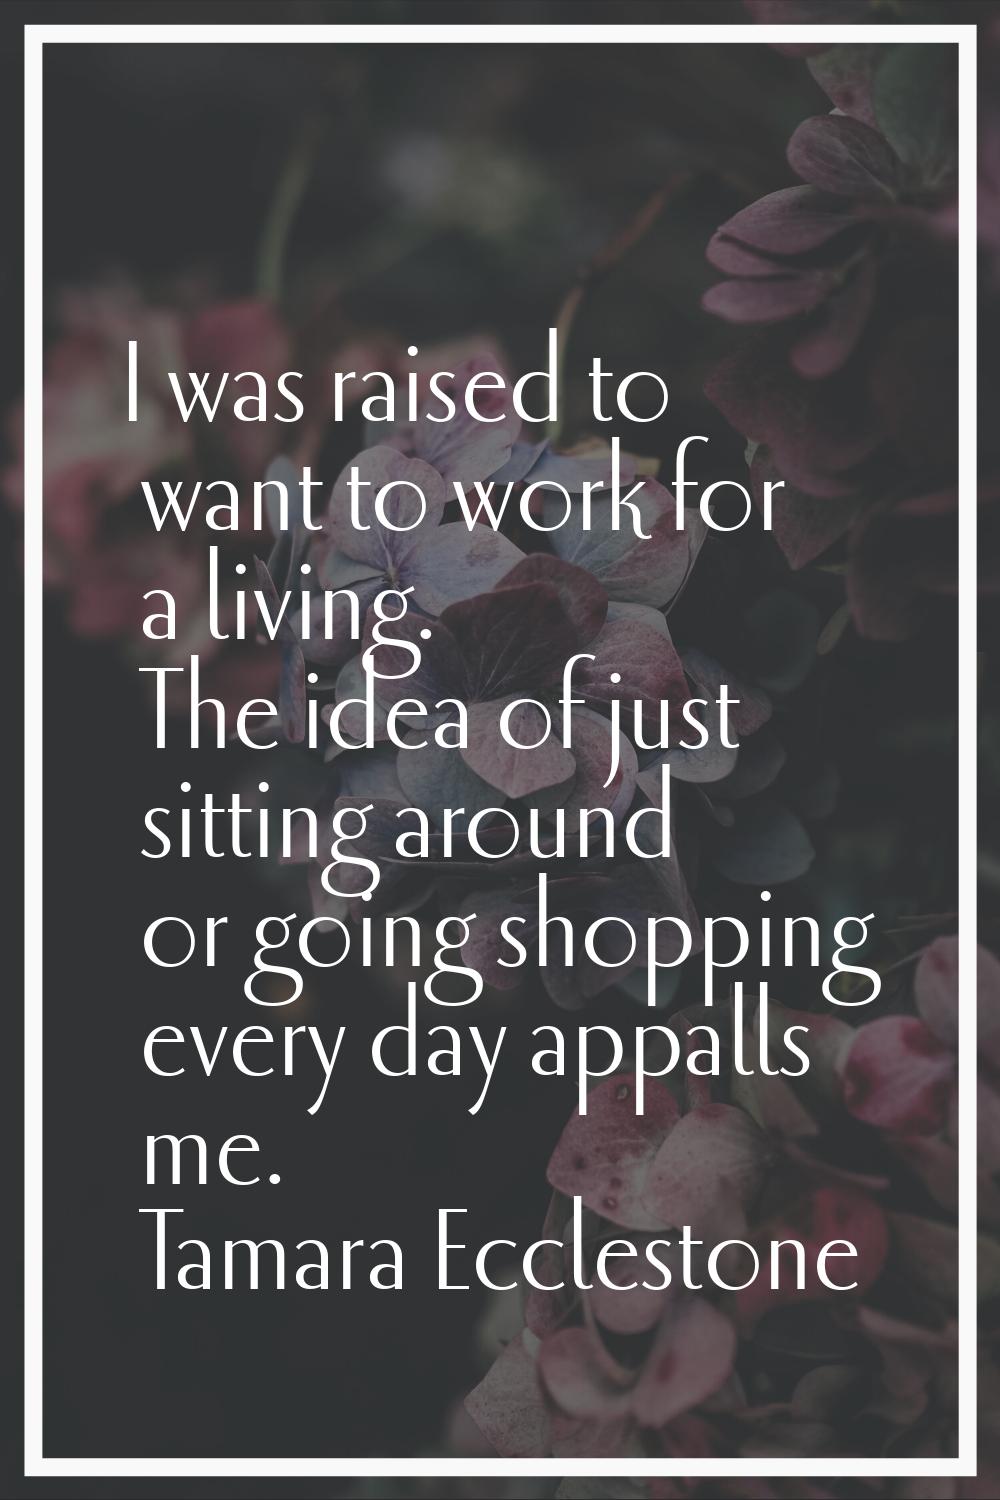 I was raised to want to work for a living. The idea of just sitting around or going shopping every 